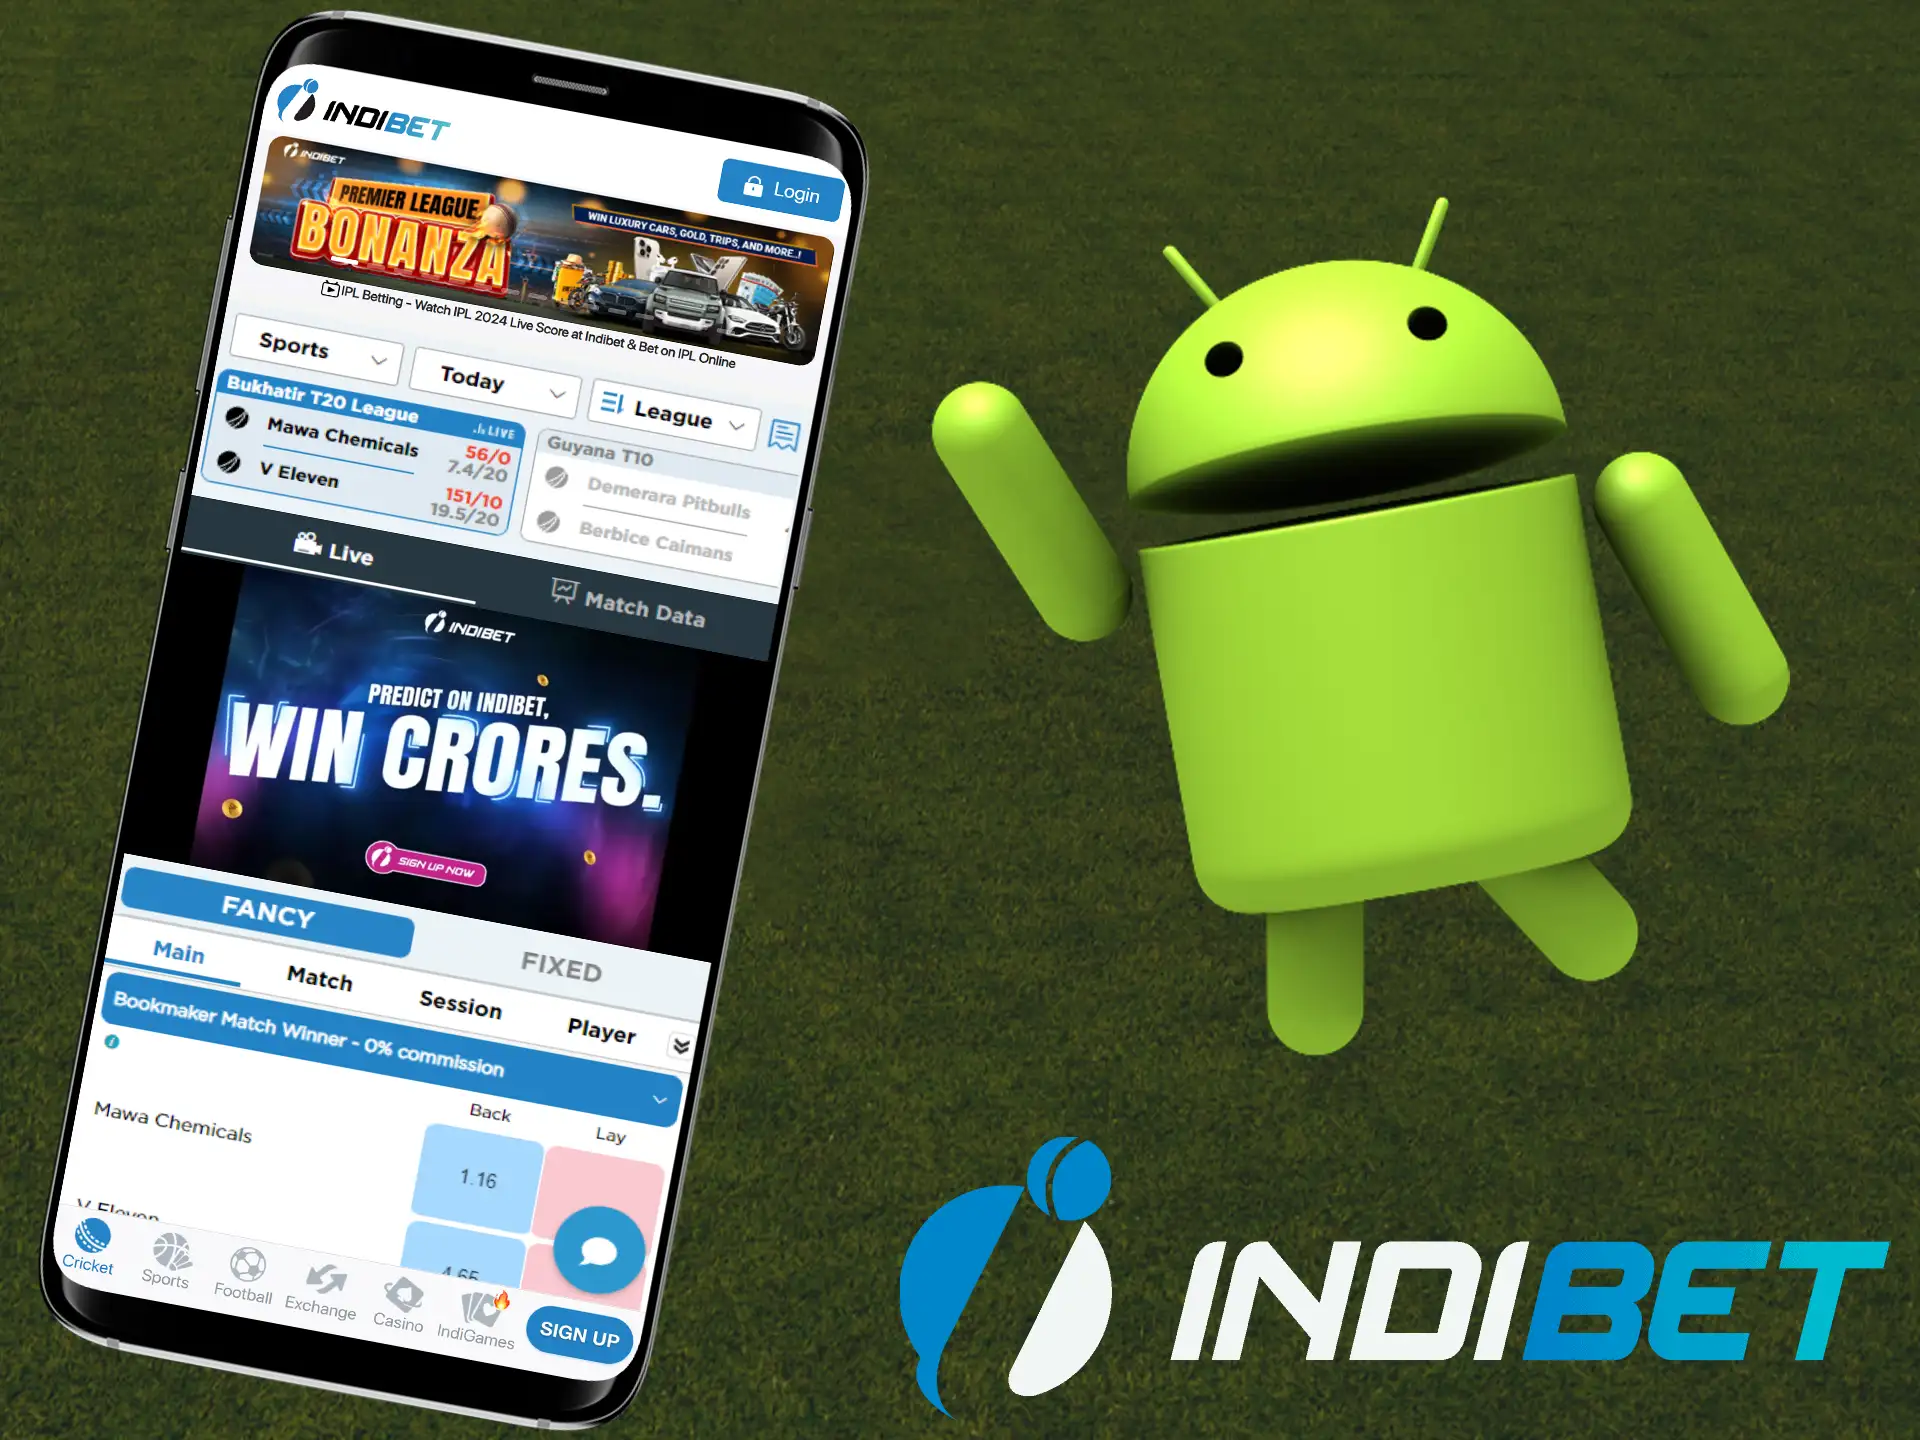 Learn how to install the Indibet app for Android.